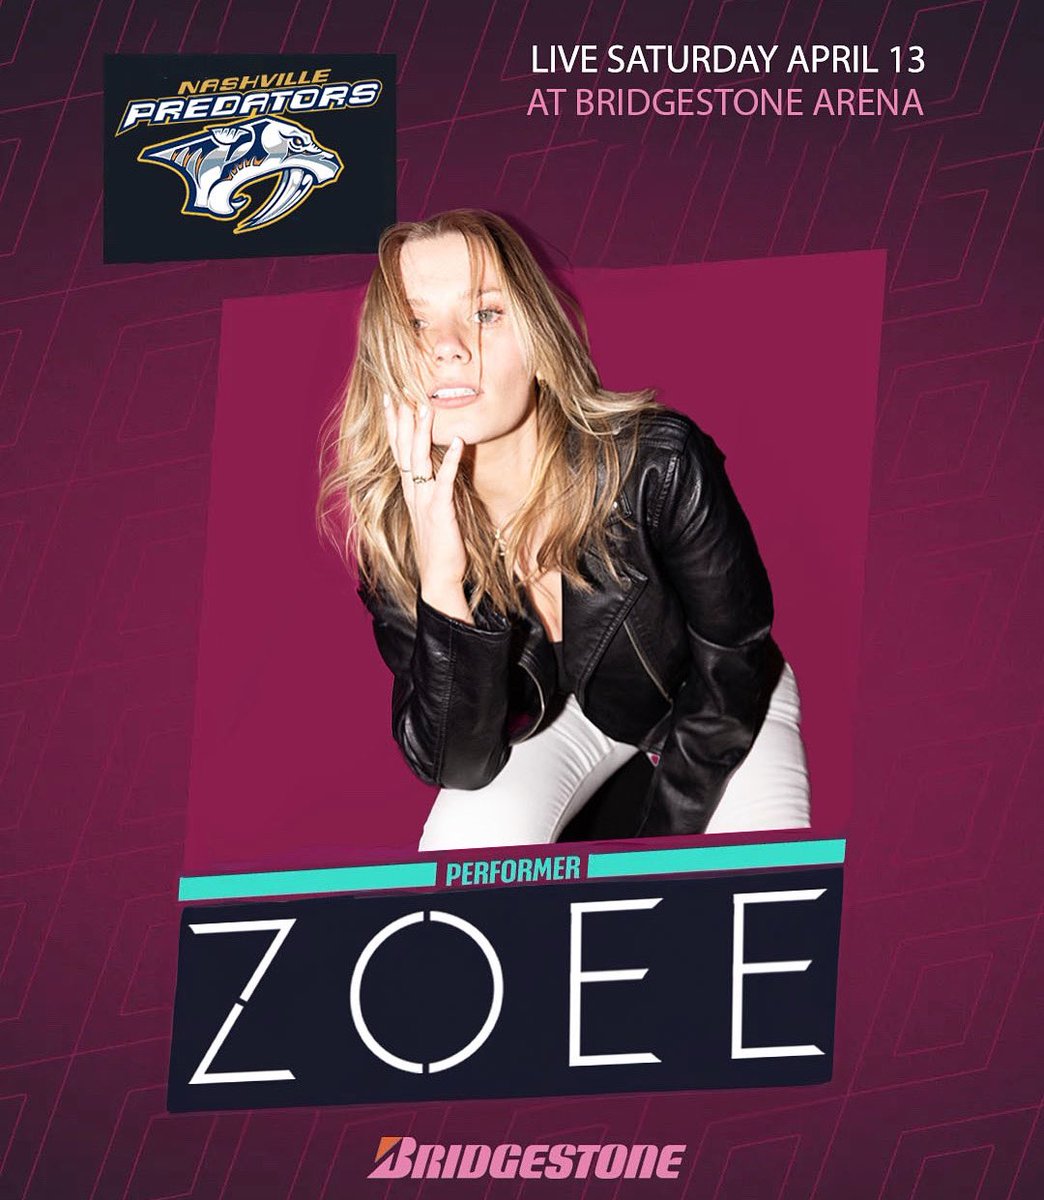 Thrilled to be performing at the season finale for @PredsNHL on Saturday the 13th, and to be making my debut at @BrdgstoneArena! 🏑🤍⚡️ill be playing some never-before heard music, so I hope to see you there!! 🪩💕 #countrymusic #nashville